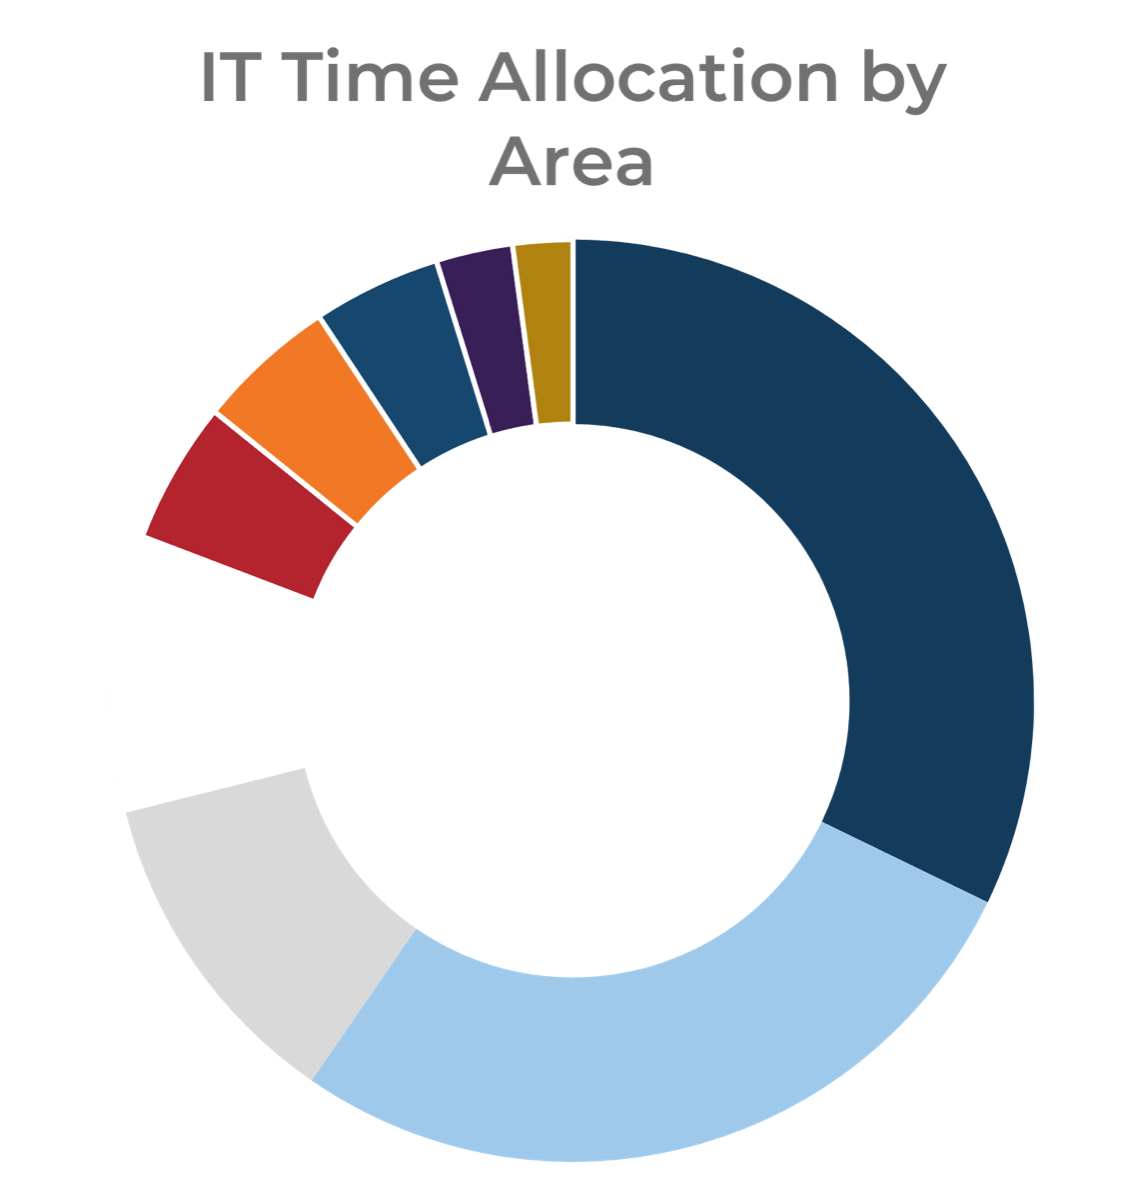 Pie chart of 'IT Time Allocation by Area'. The grey section on the bottom left represents 'Projects and Project Portfolio Management, 11.5%'.